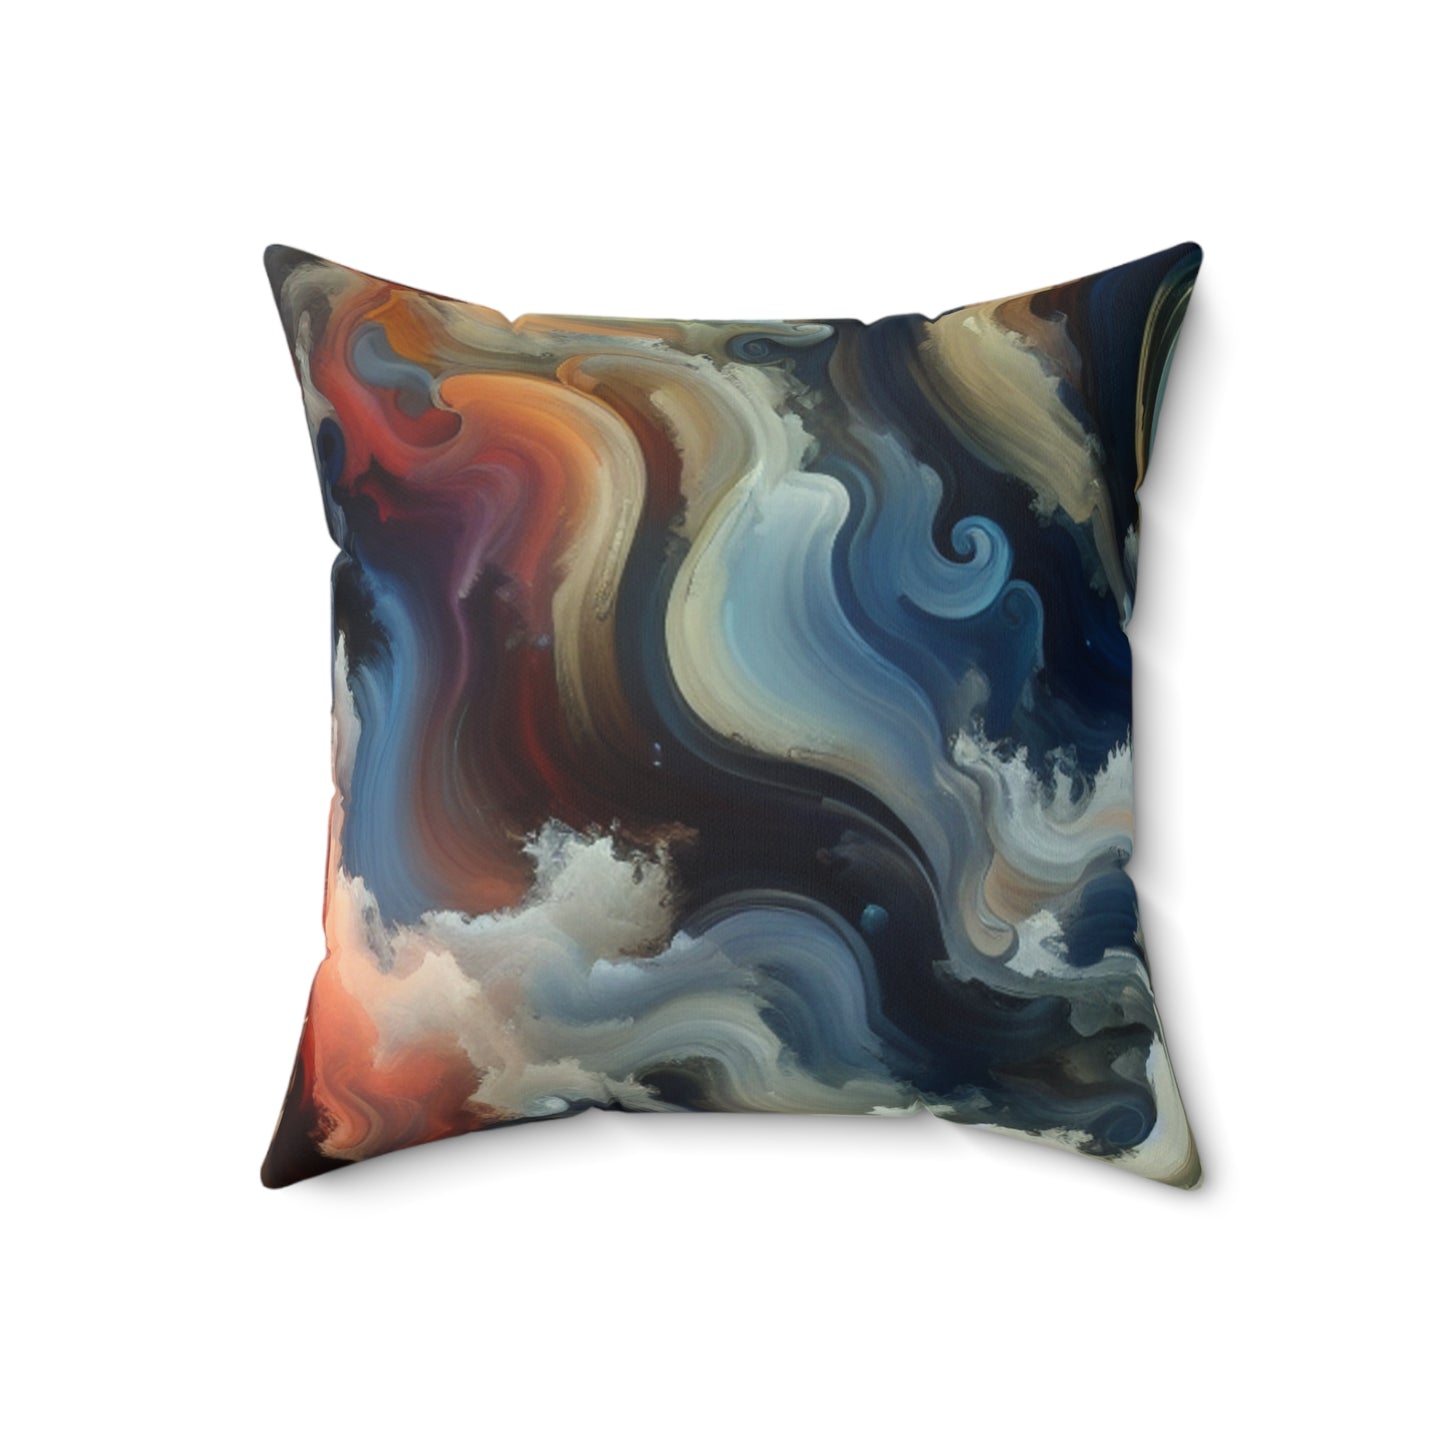 "Chaotic Balance: A Universe of Color" - The Alien Spun Polyester Square Pillow Abstract Art Style